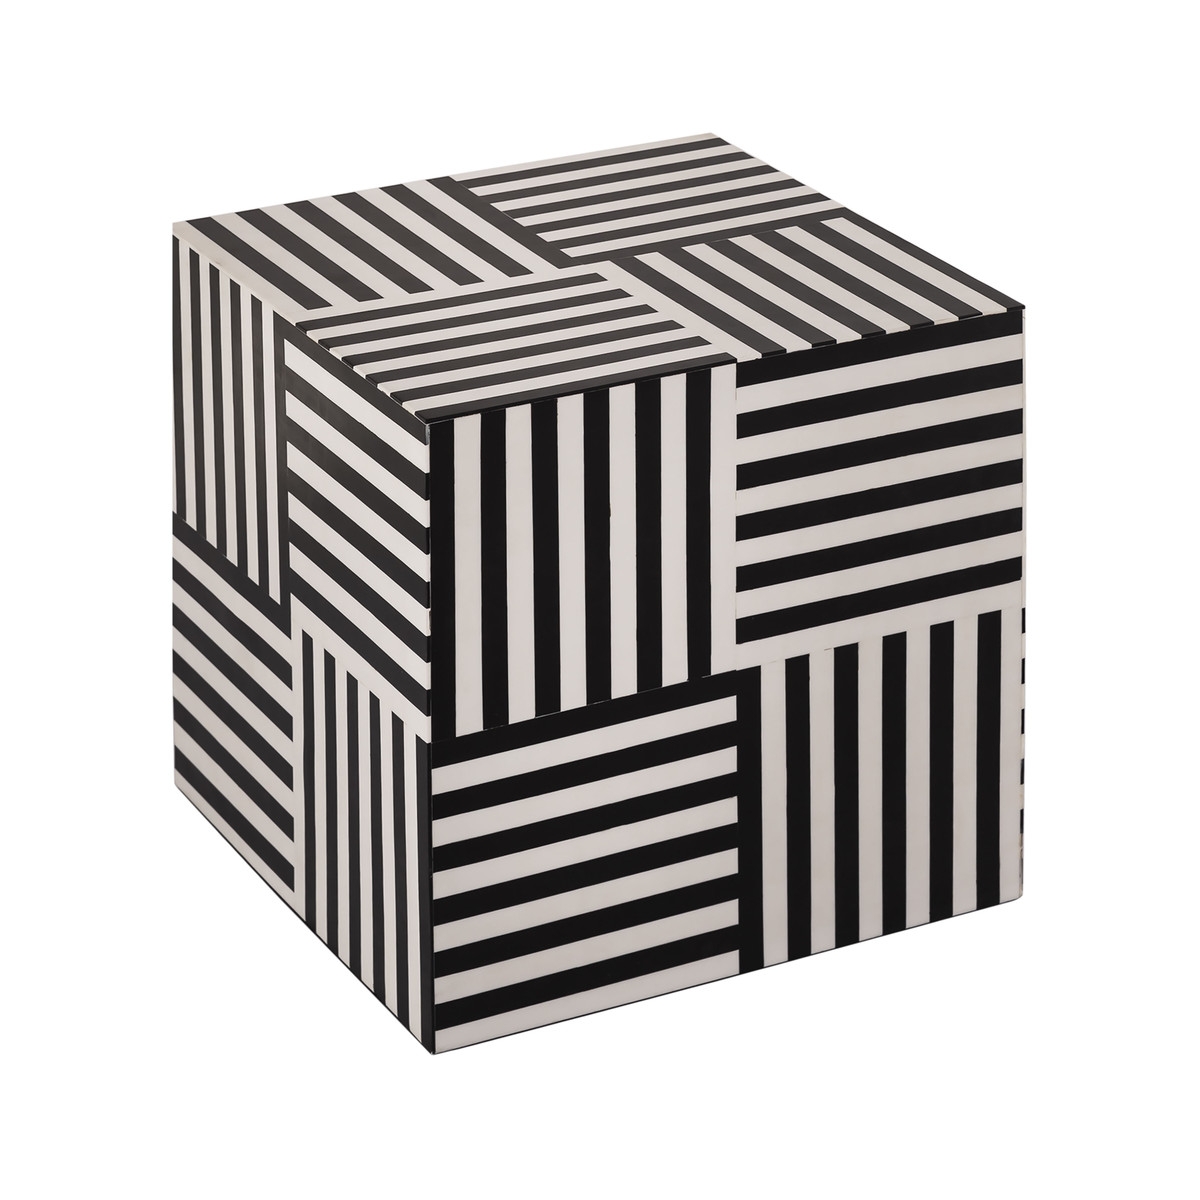 Cube Side Table - Image 1